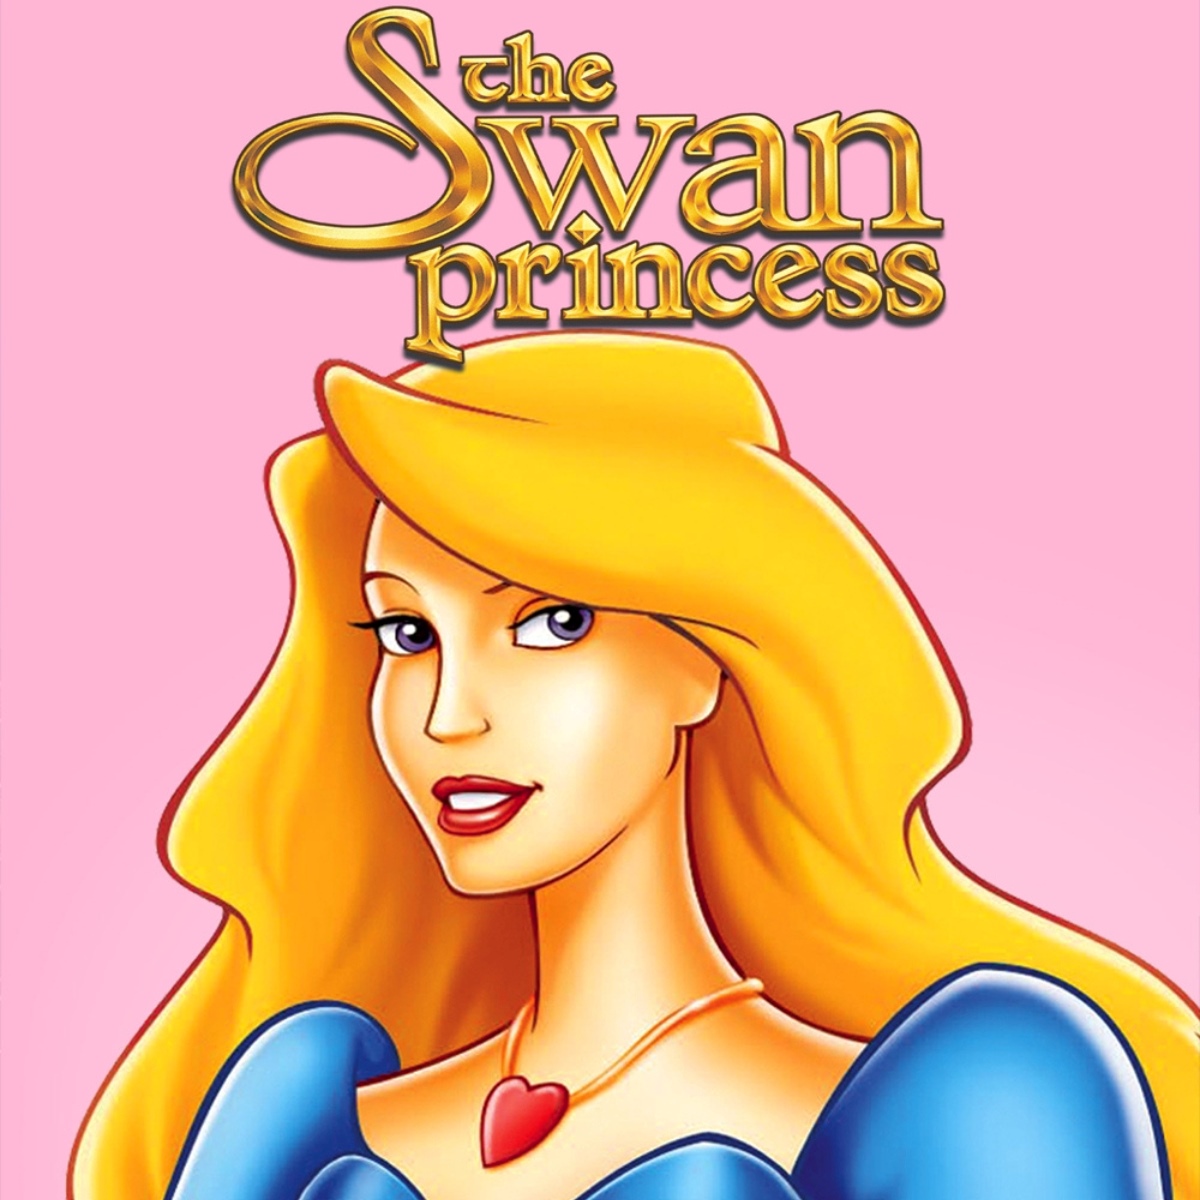 17-facts-about-princess-odette-the-swan-princess